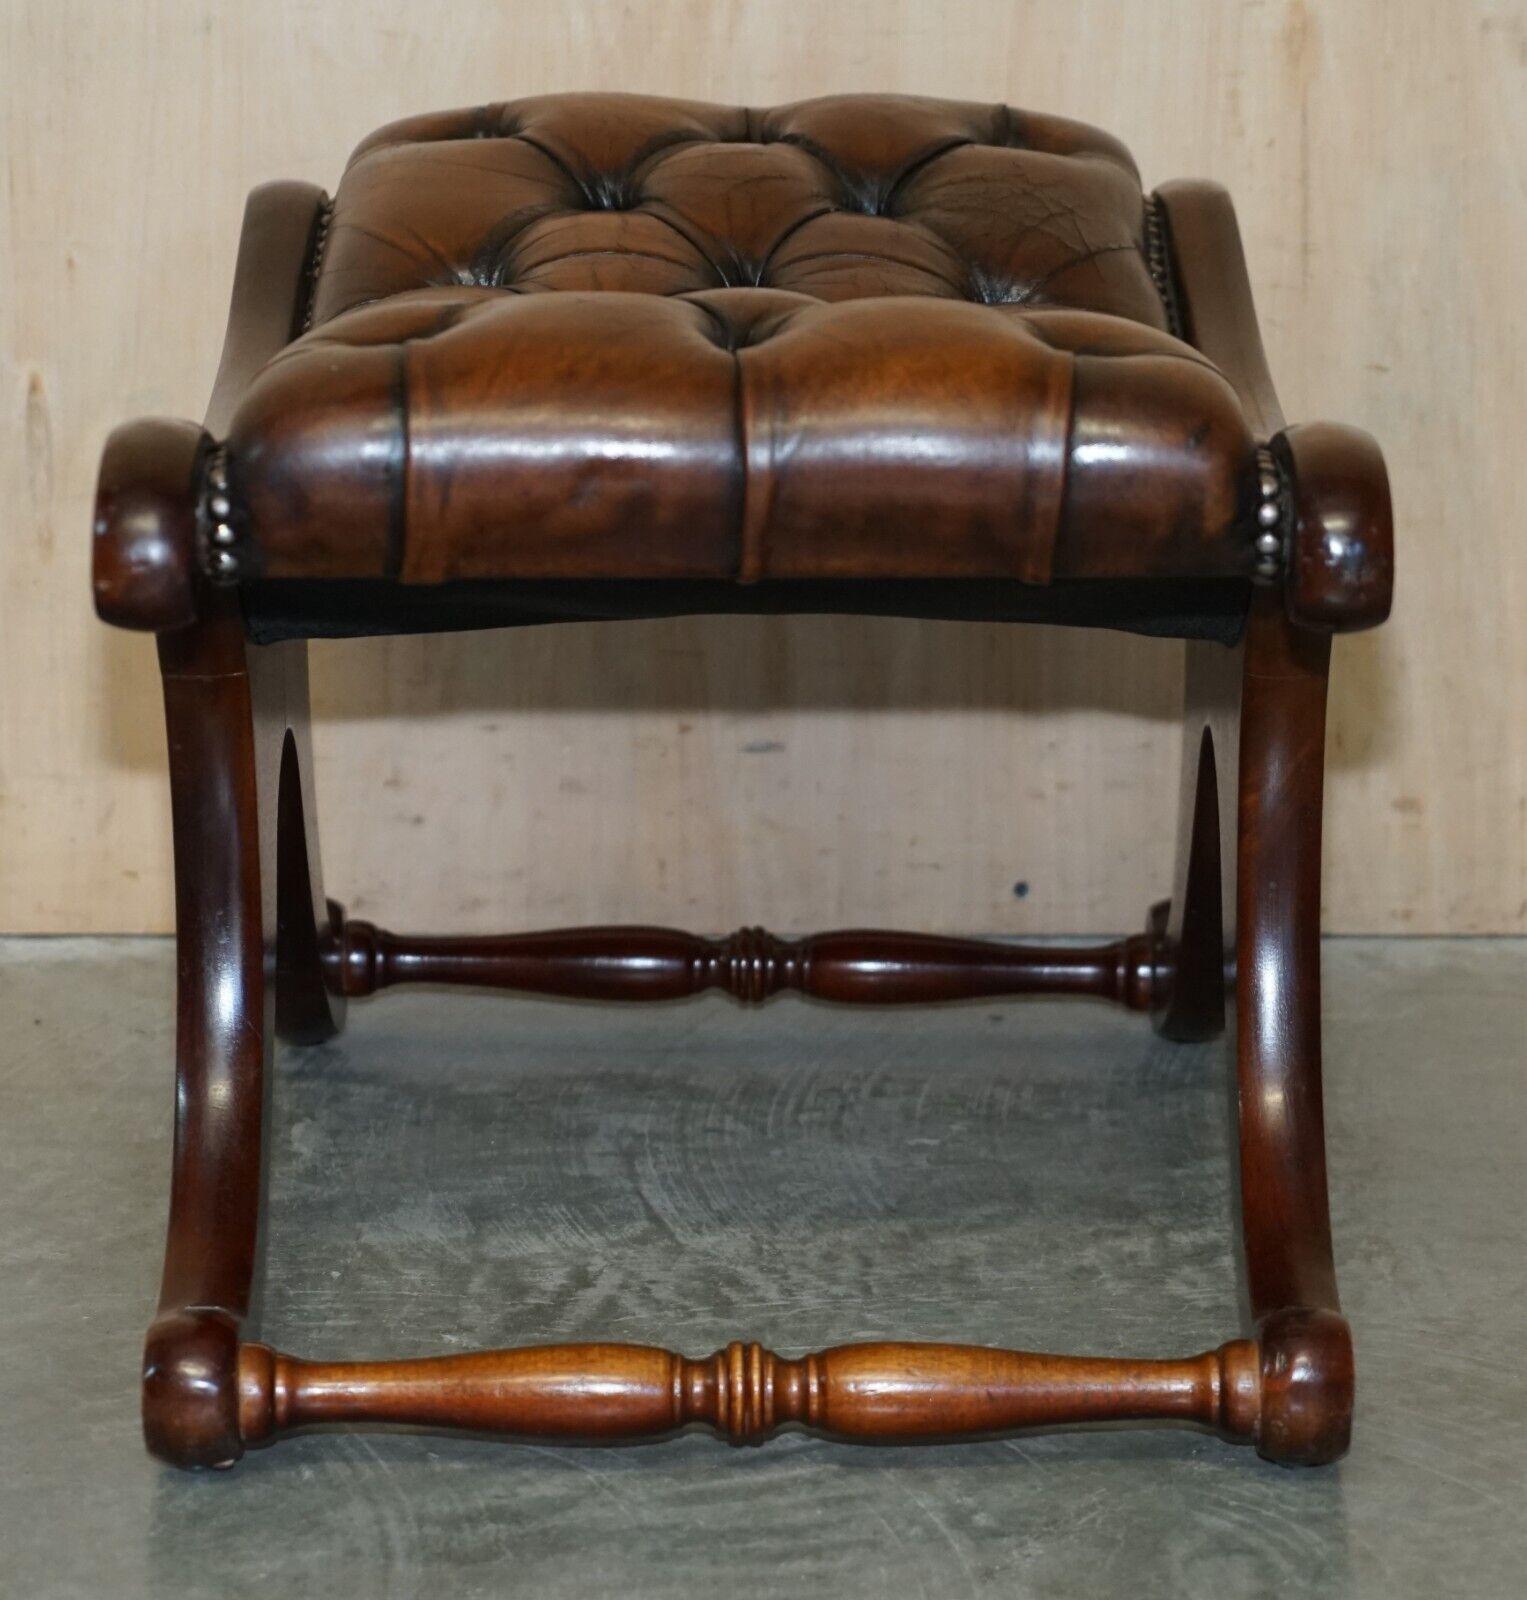 PAIR OF RESTORED CHESTERFIELD FOOTSTOOL OTTOMANS IN RiCH HAND DYED BROWN LEATHER For Sale 1